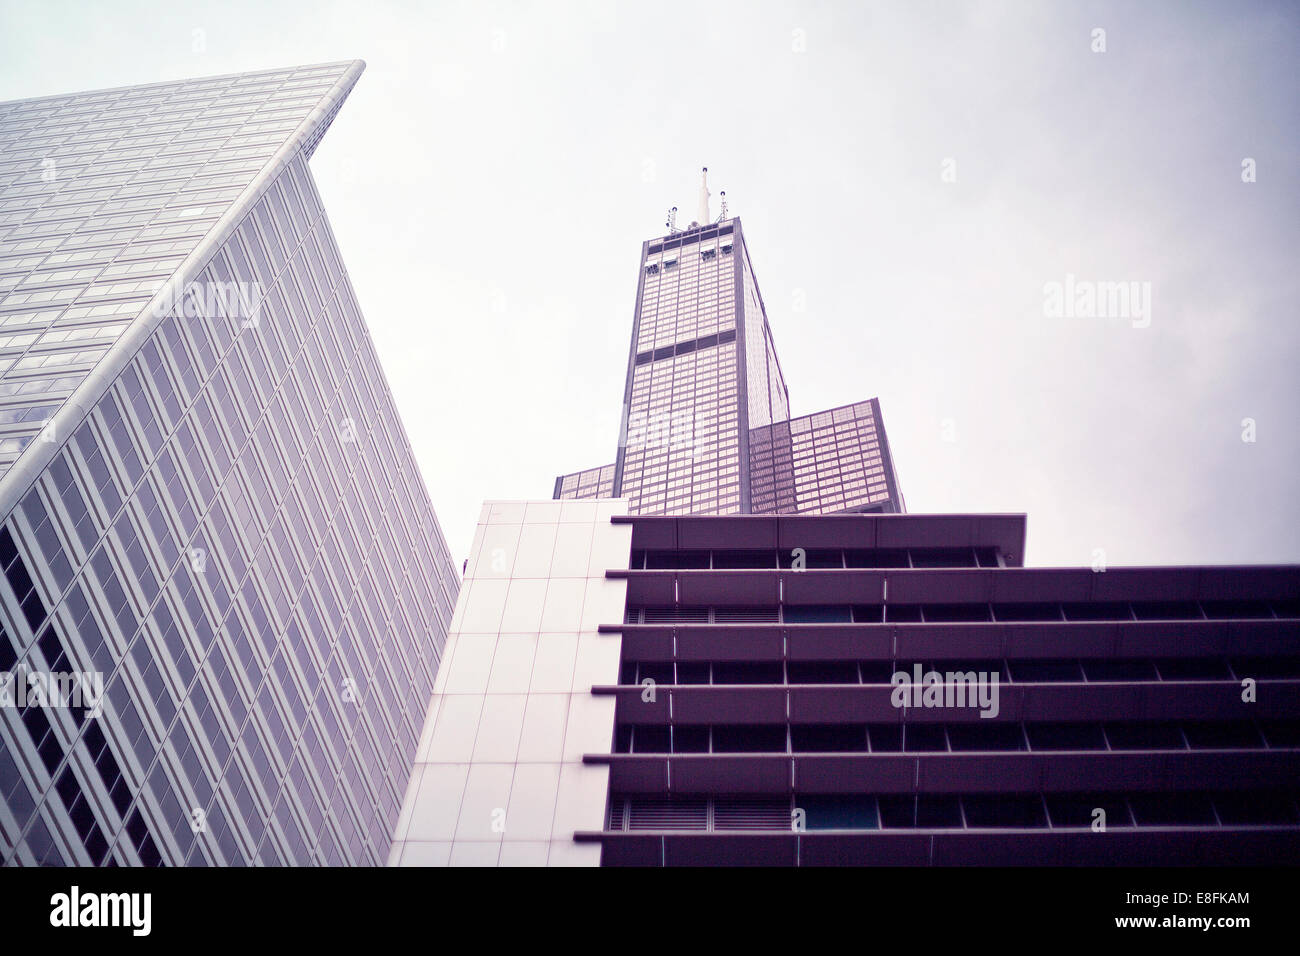 USA, Illinois, Cook County, Chicago, Willis Tower in Chicago Stock Photo